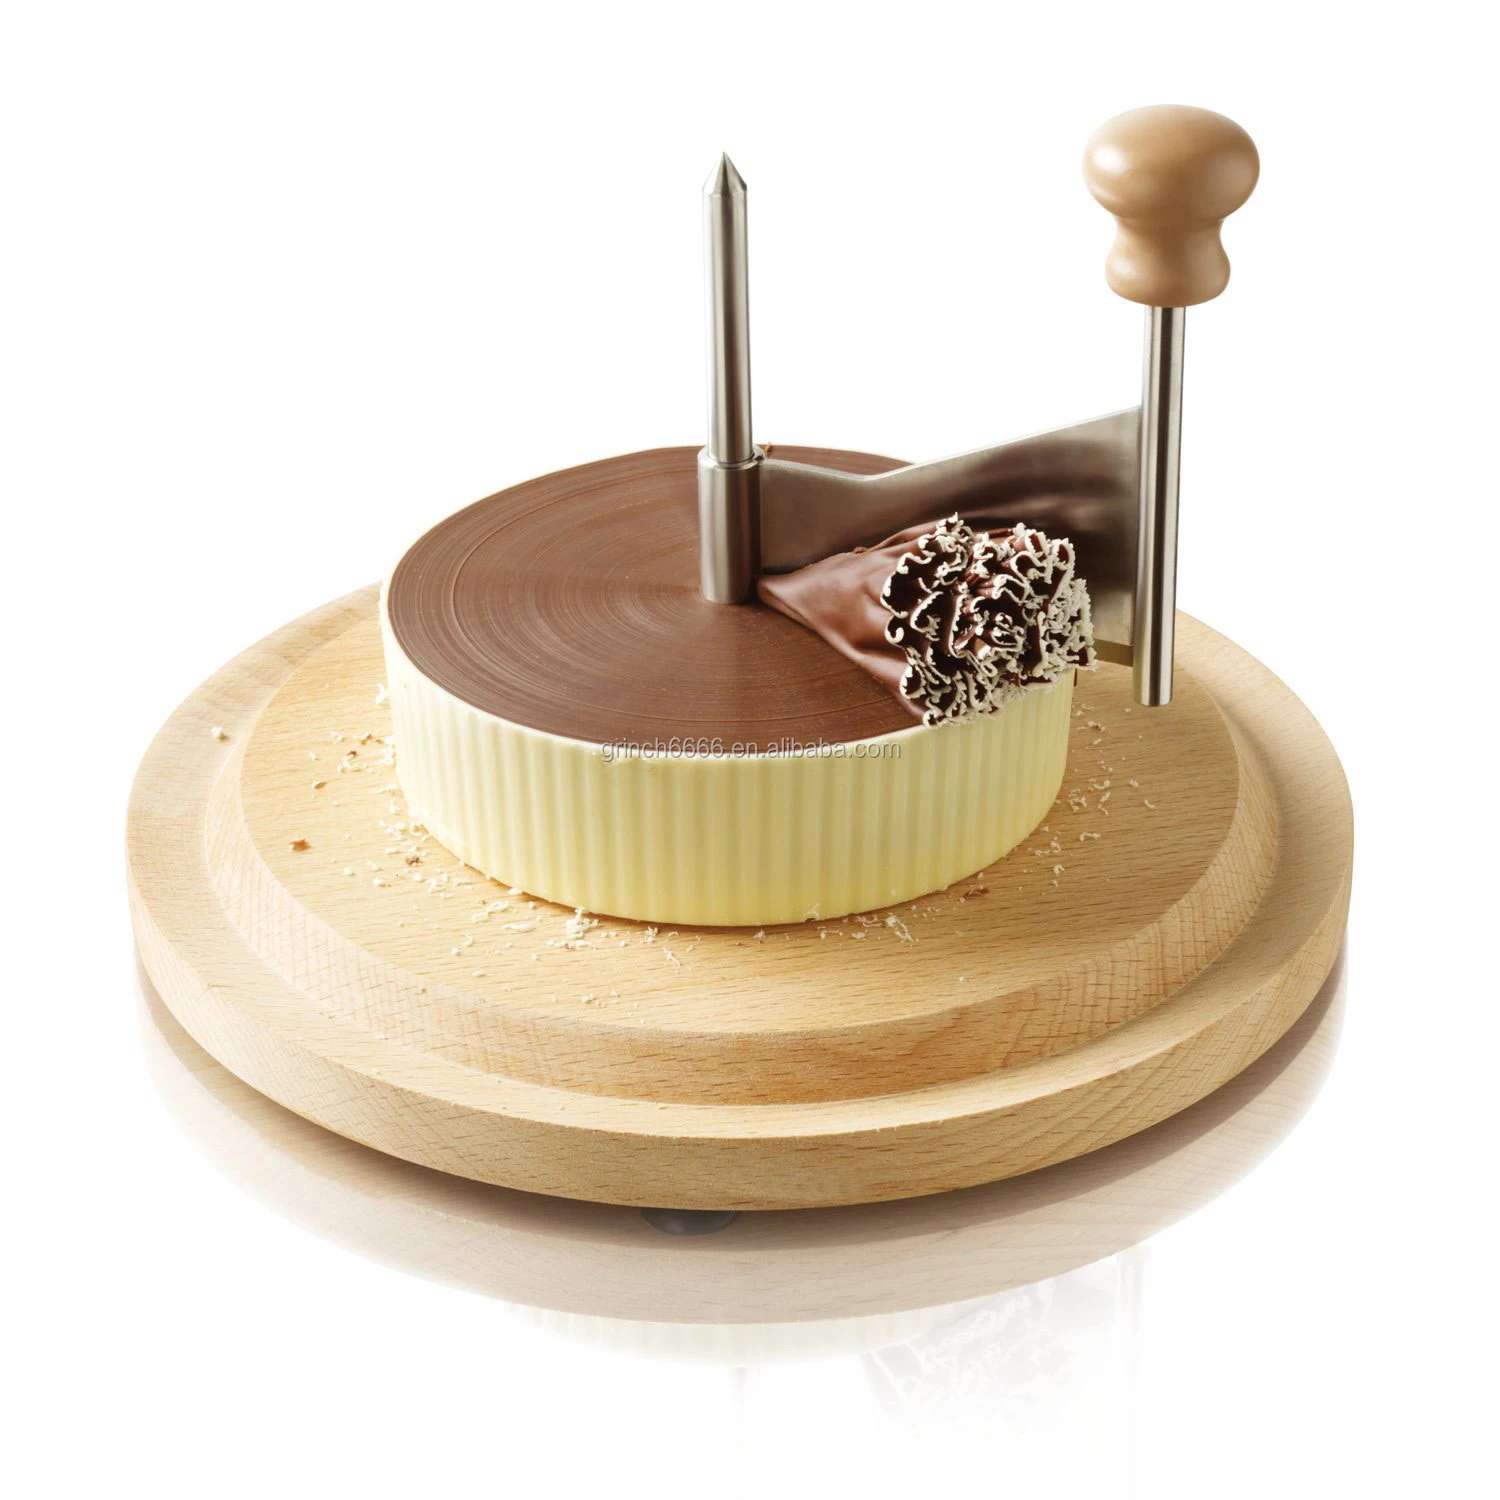 Cheese & Chocolate Curler With Dome Lid Included - Buy Cheese & Chocolate  Curler With Dome Lid Included Product on